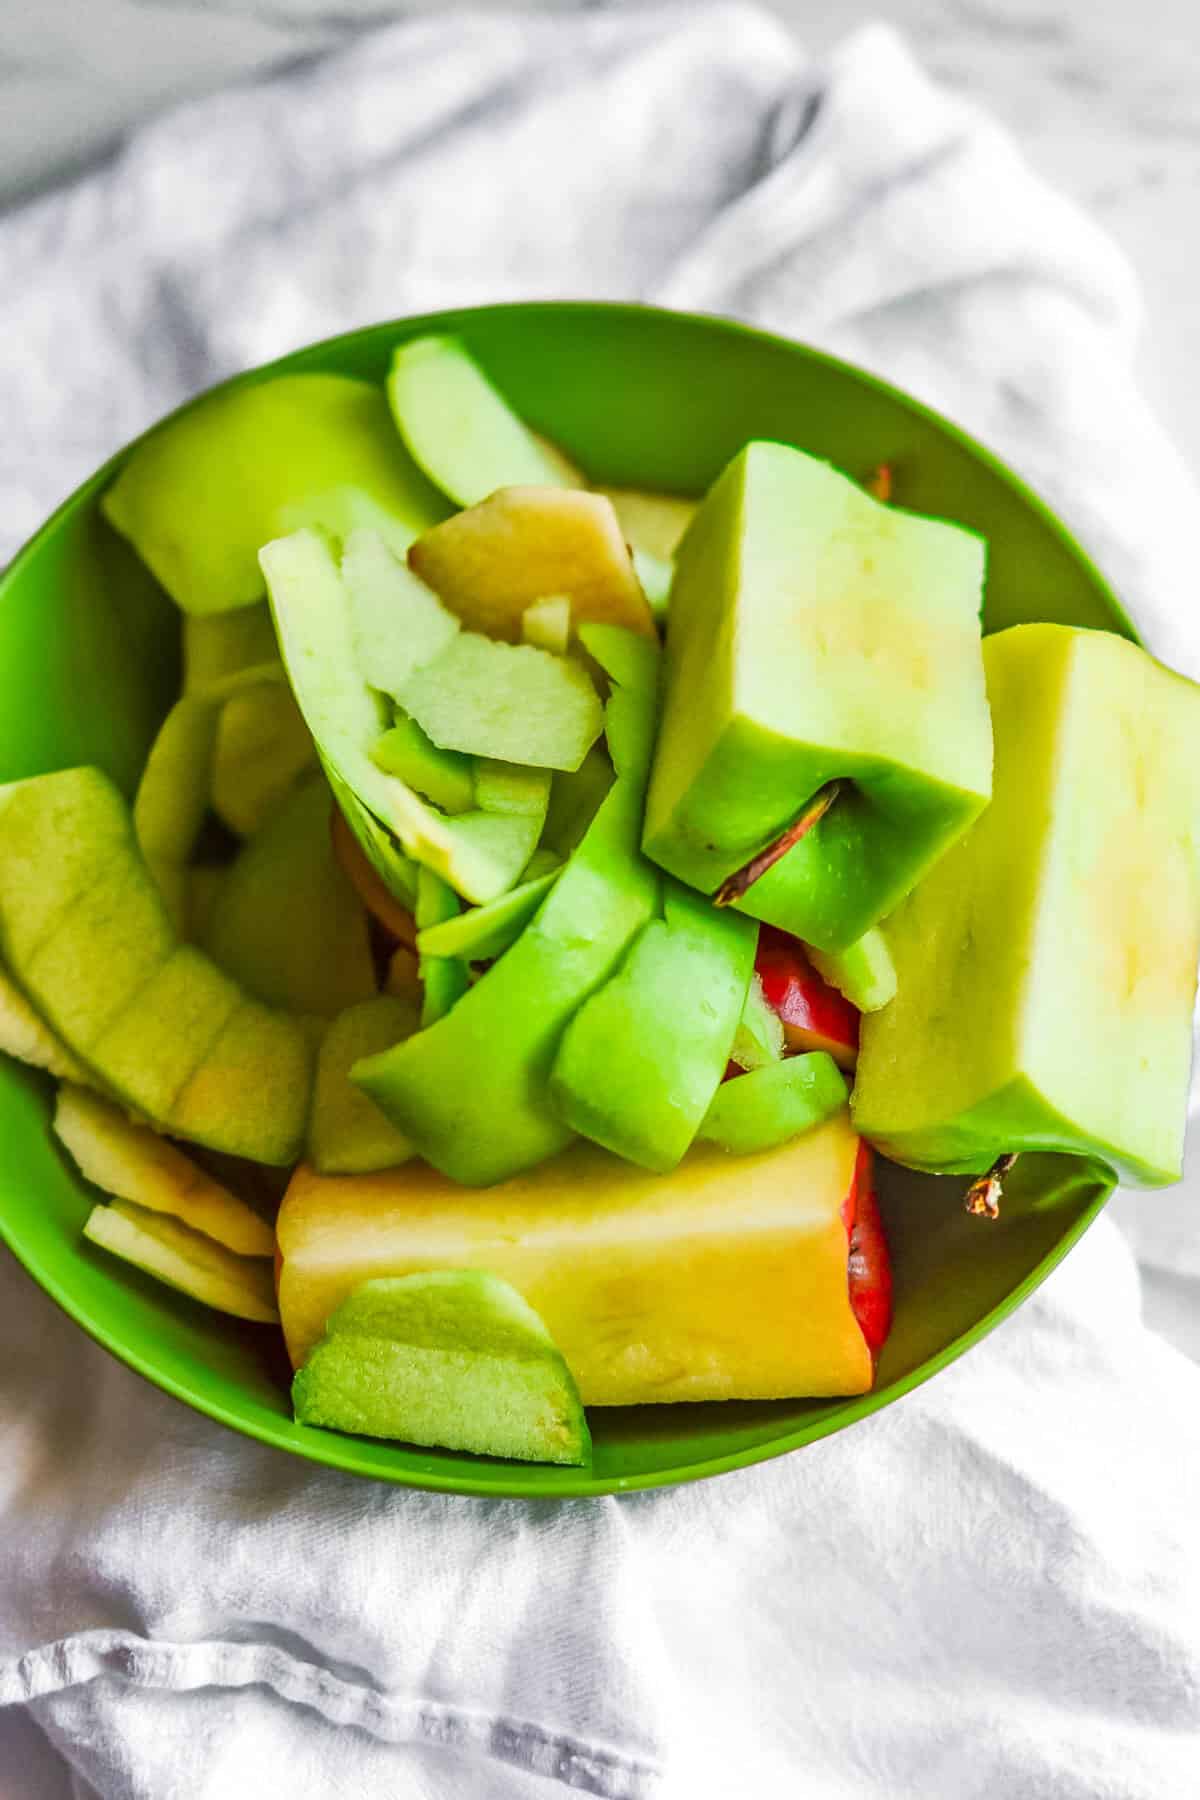 Cores and apple peels in a green bowl.